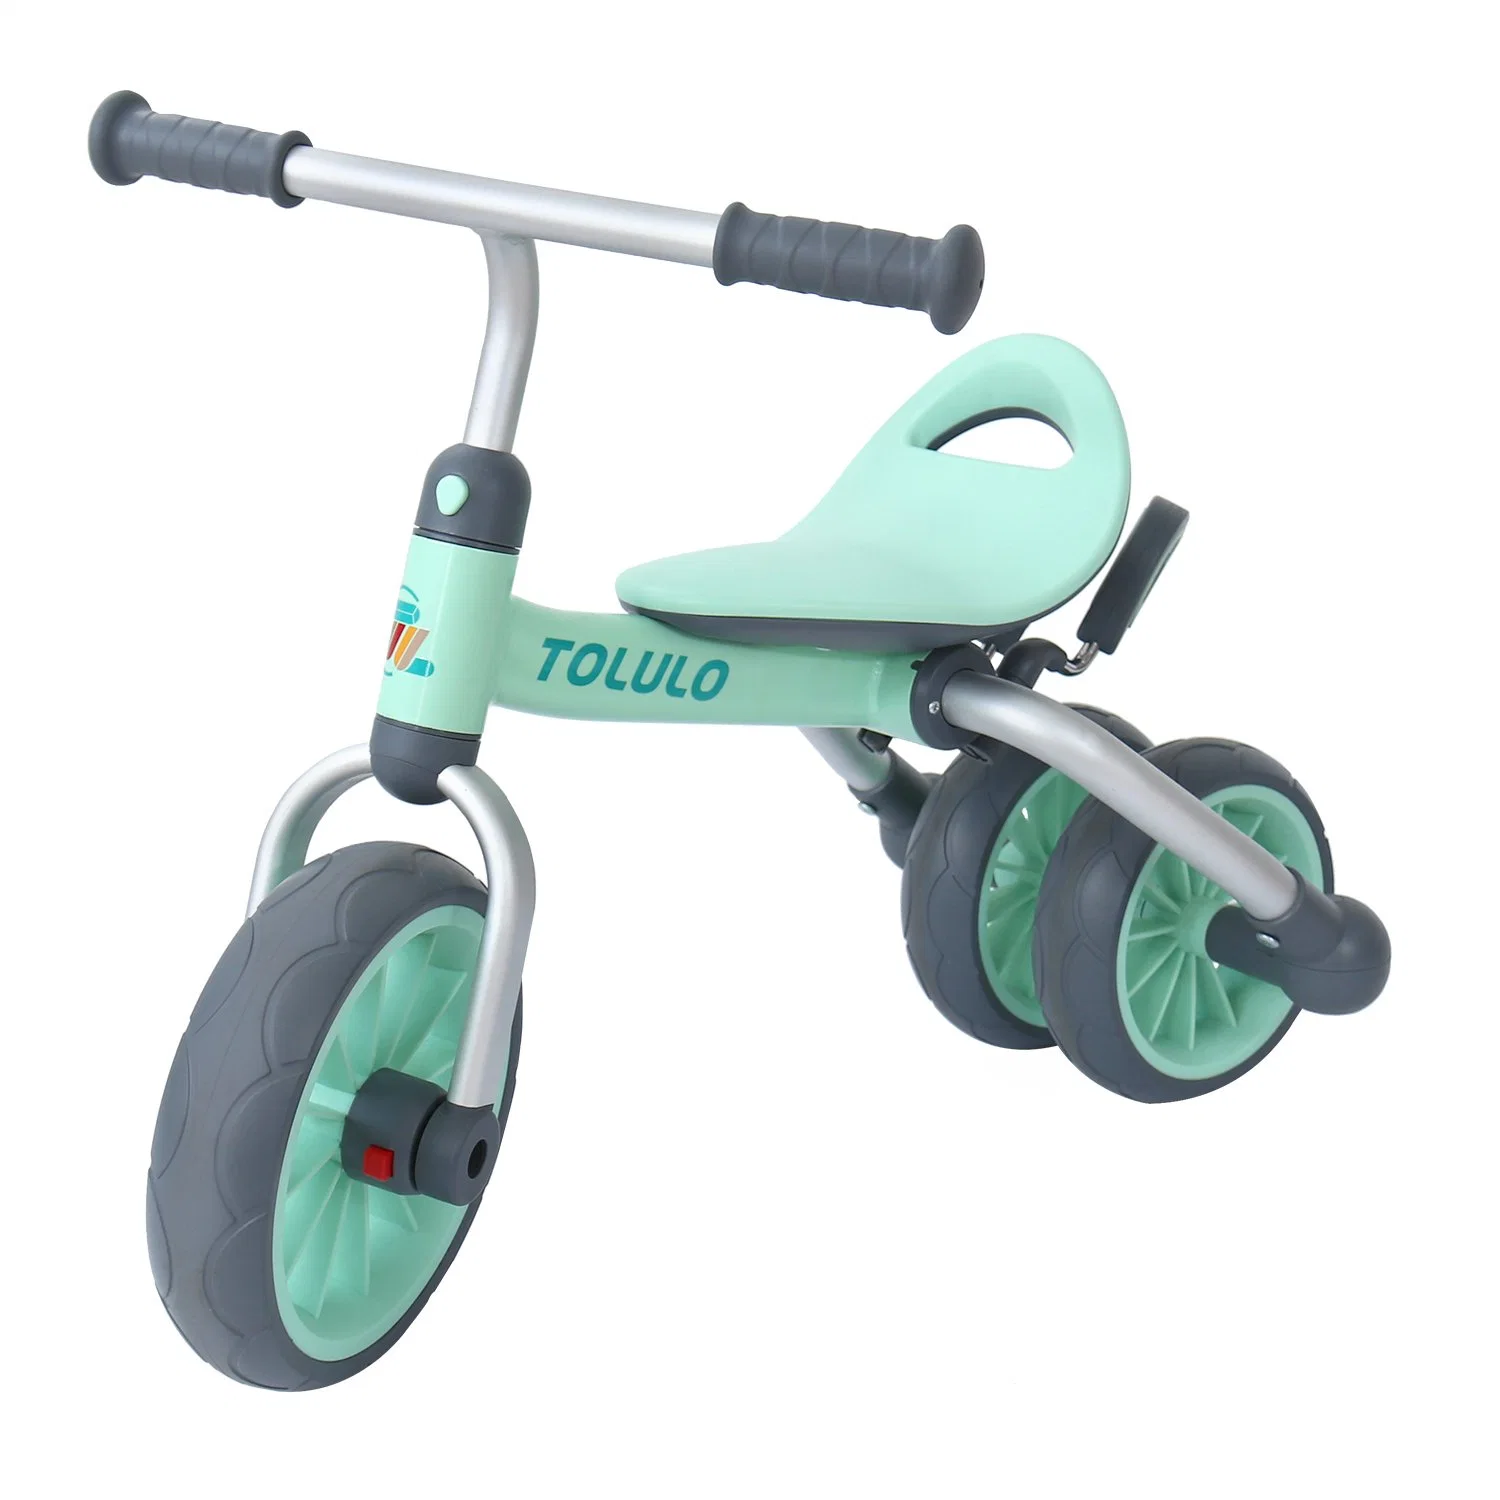 Toddler Stroller Bike Three Wheel Bike Scooter PU Wheels Children Kids Cycling Bicycle Bike for Childrens Toddler Ride with Pedal